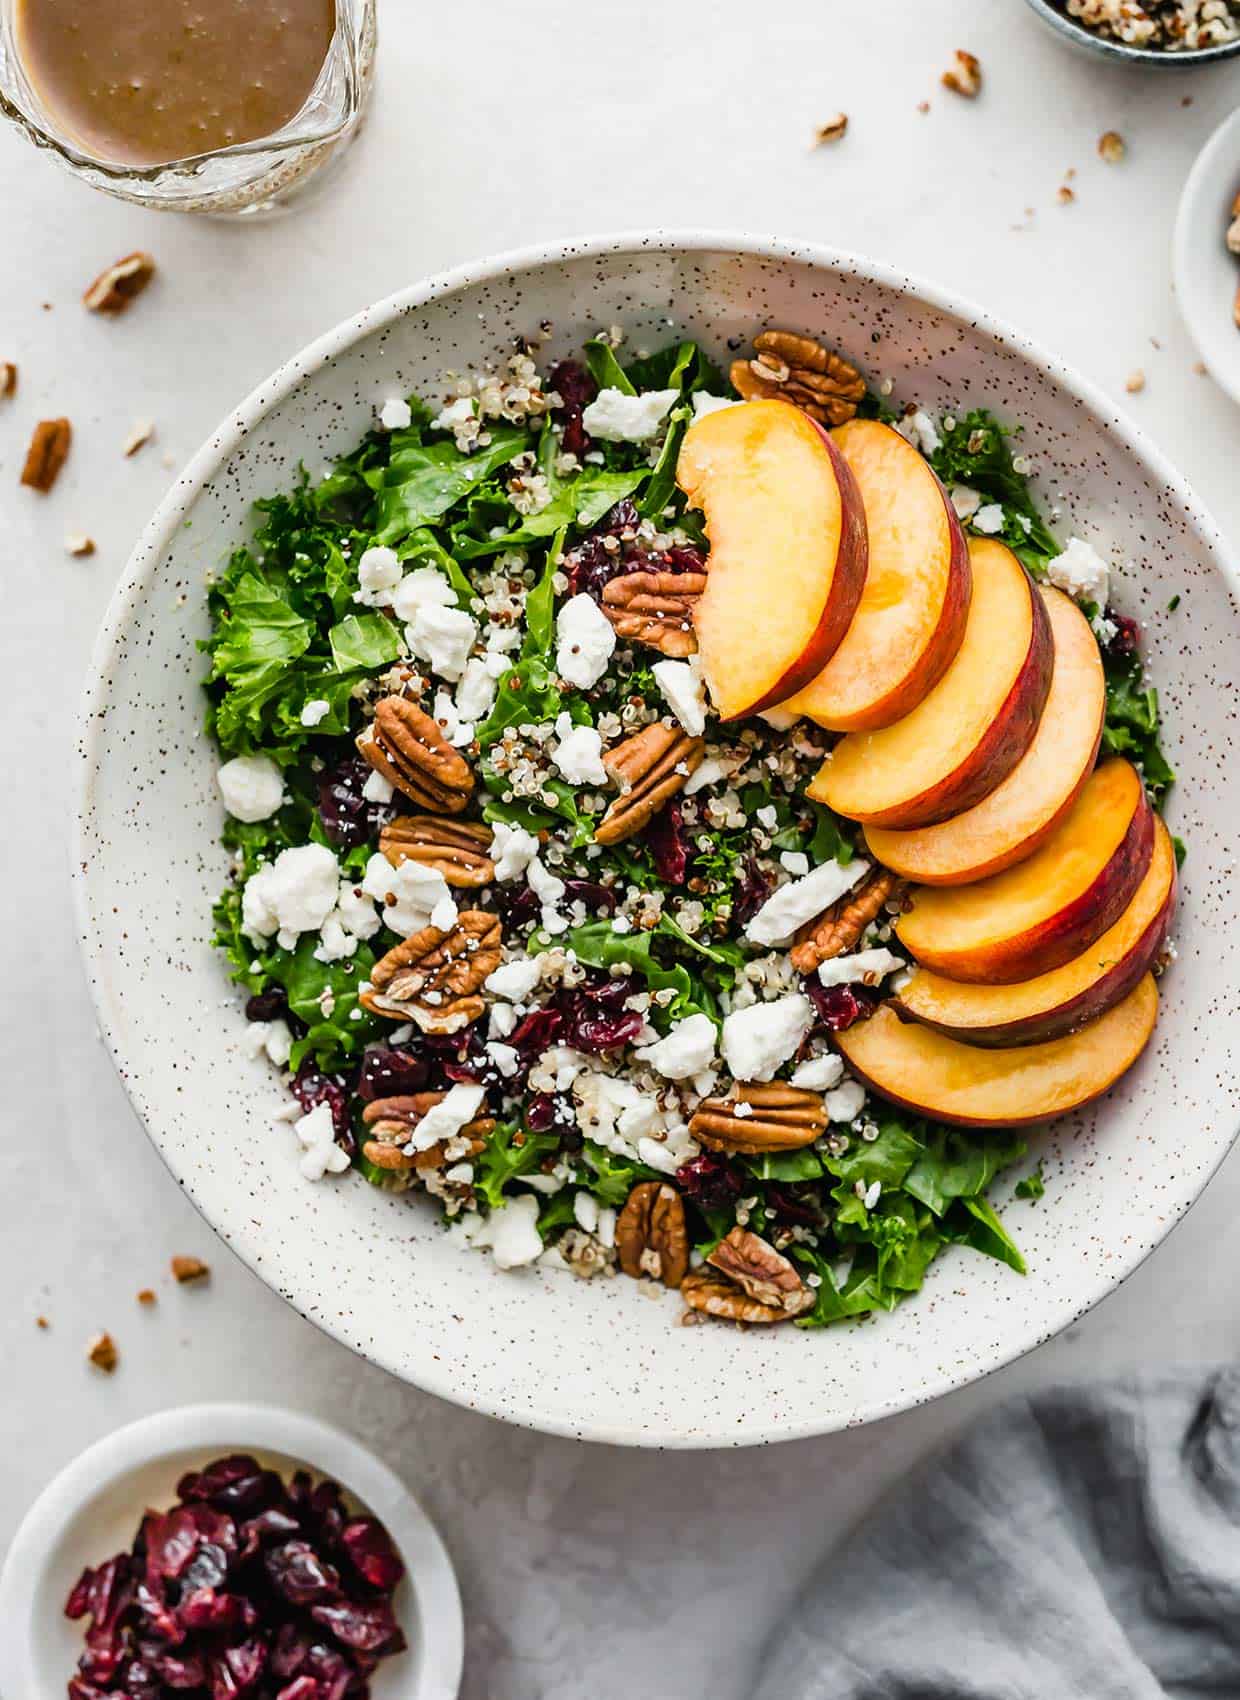 A Kale and Quinoa Salad with Cranberries and Feta and sliced peaches in a white bowl.